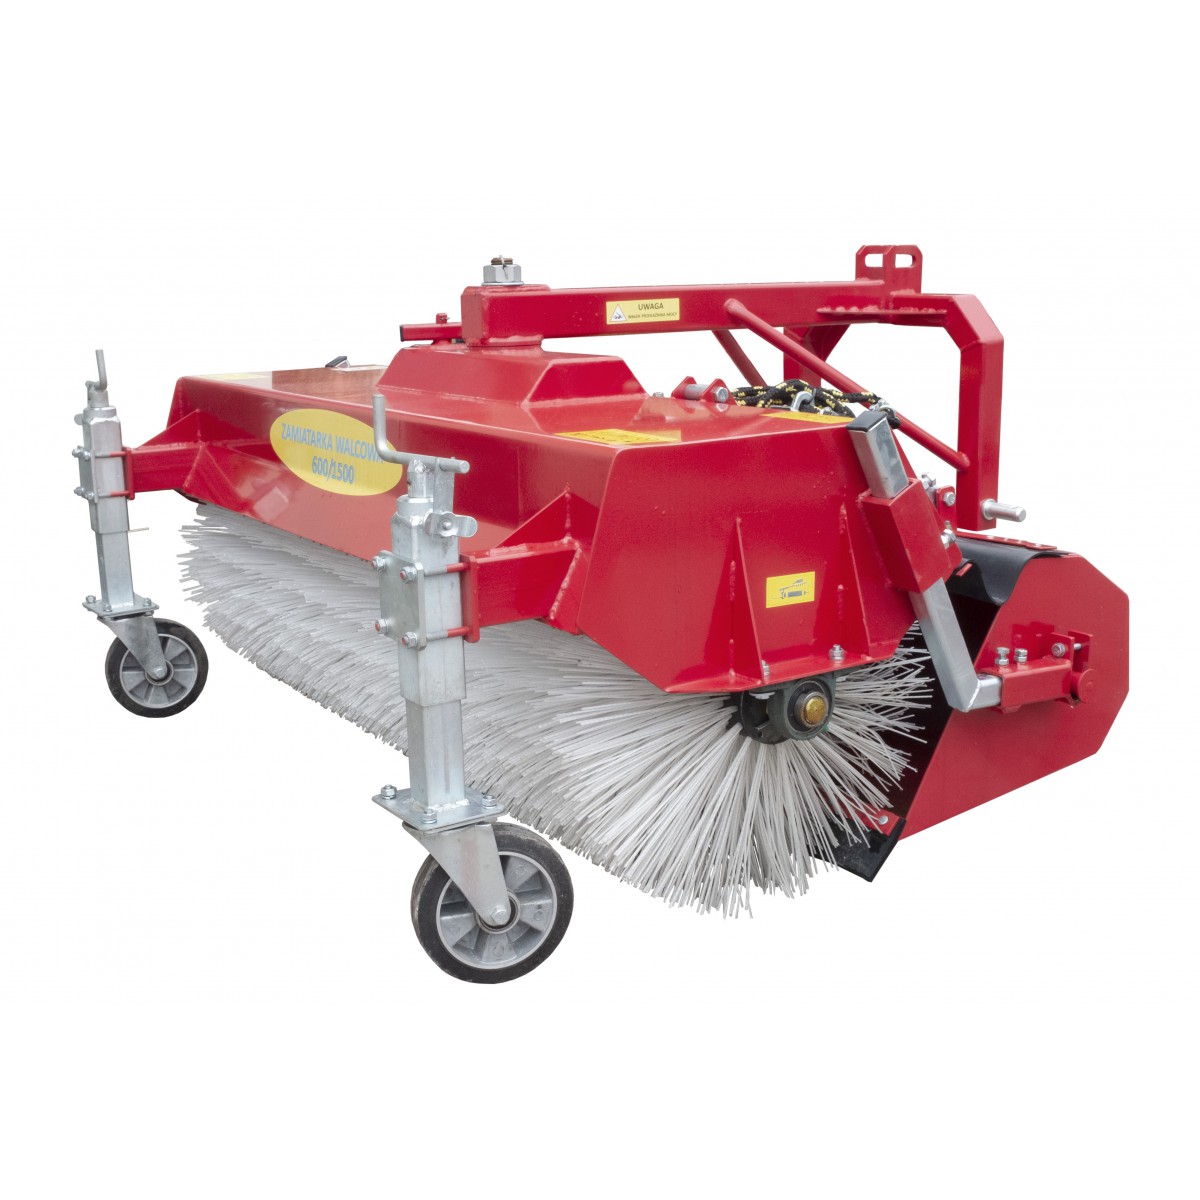 150 cm sweeper for the 4FARMER tractor with a basket